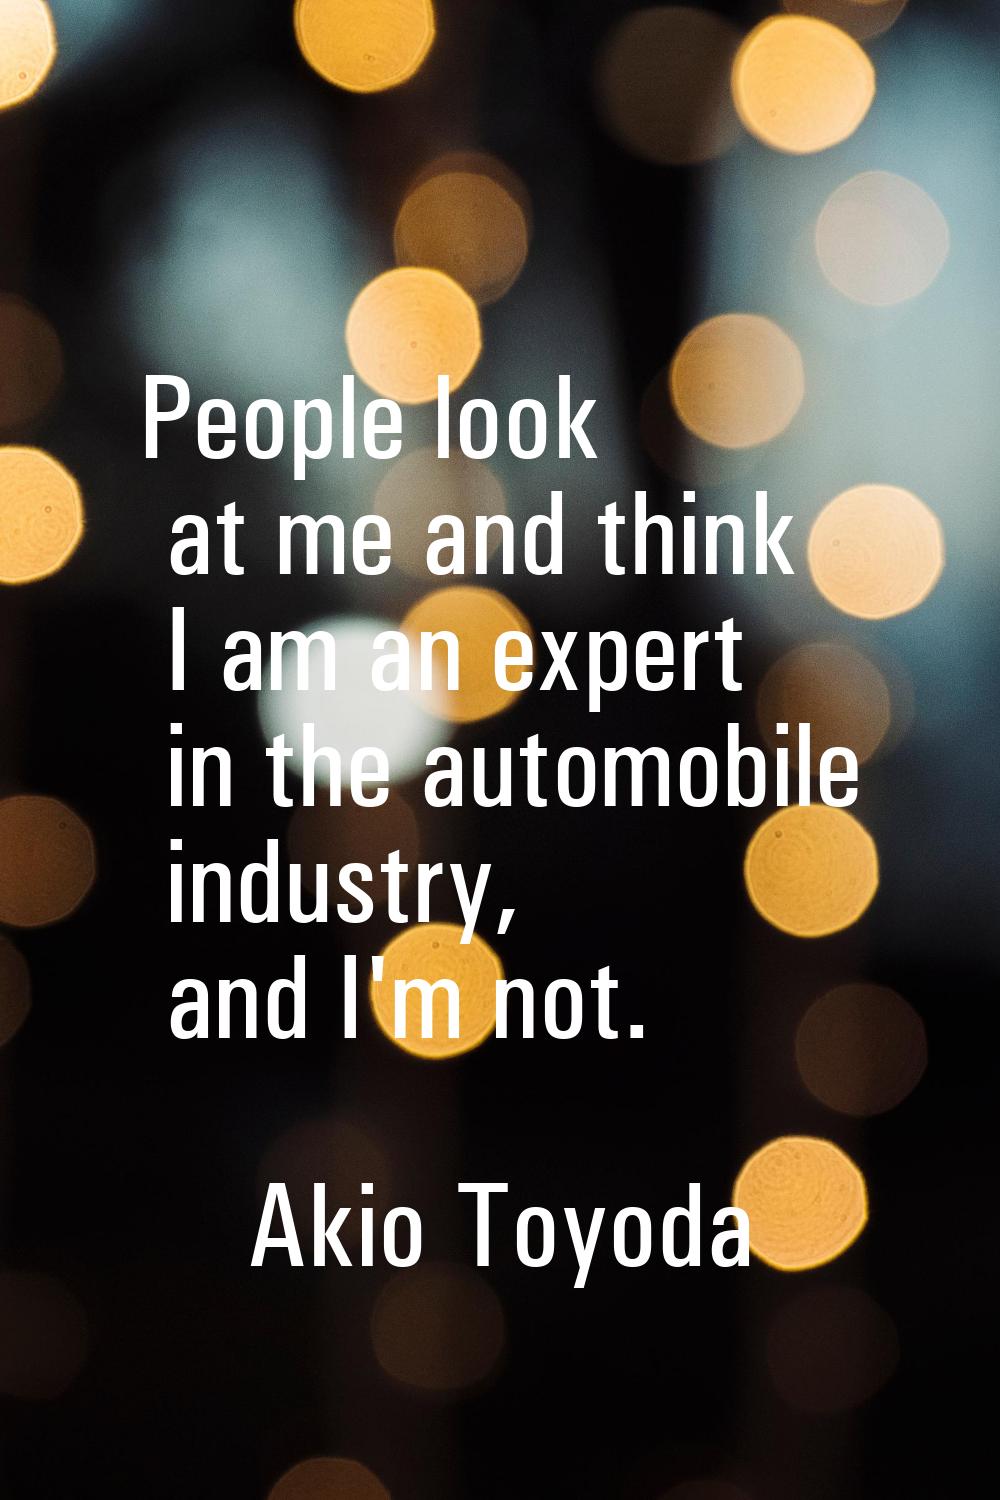 People look at me and think I am an expert in the automobile industry, and I'm not.